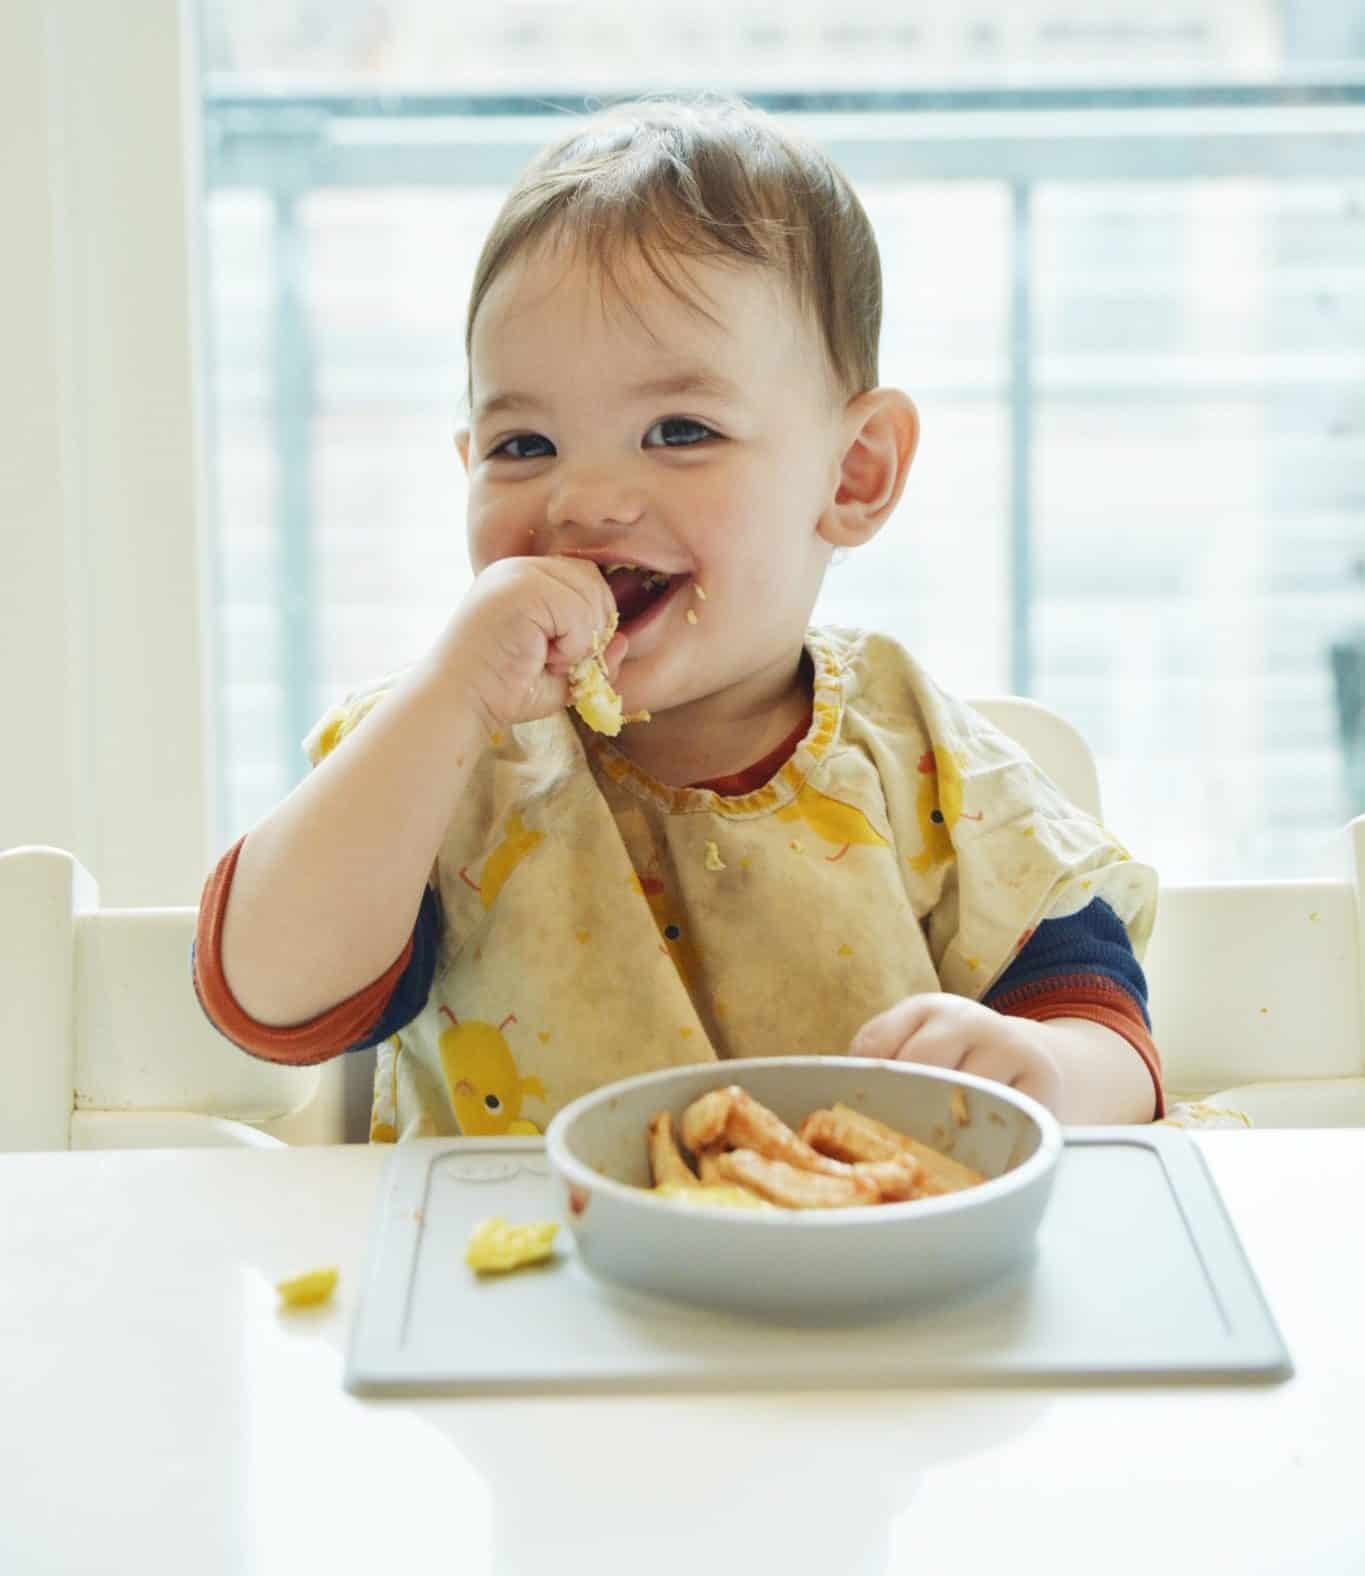 Baby-Led Weaning: What You Need to Know